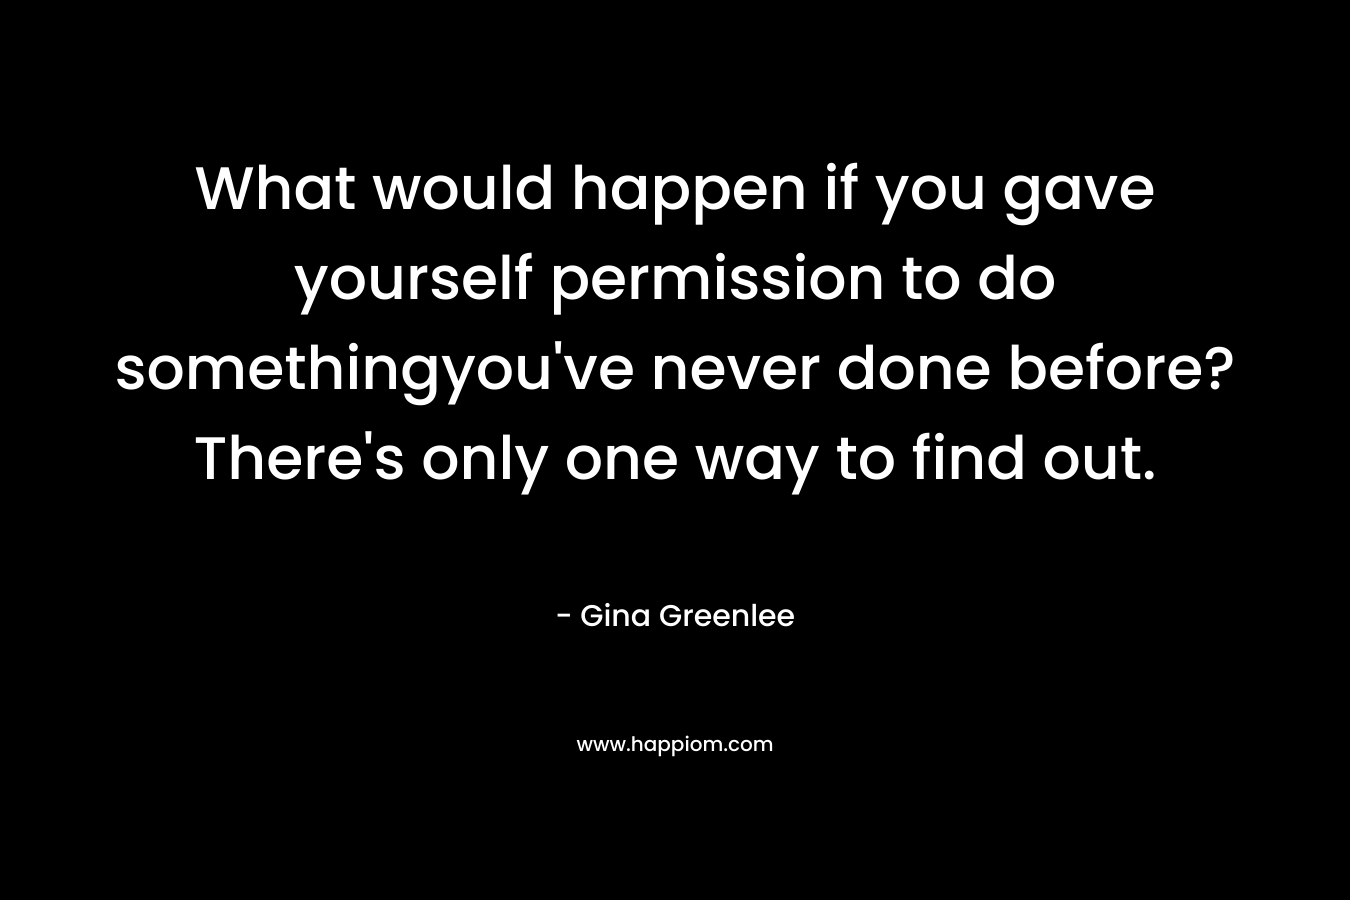 What would happen if you gave yourself permission to do somethingyou’ve never done before? There’s only one way to find out. – Gina Greenlee